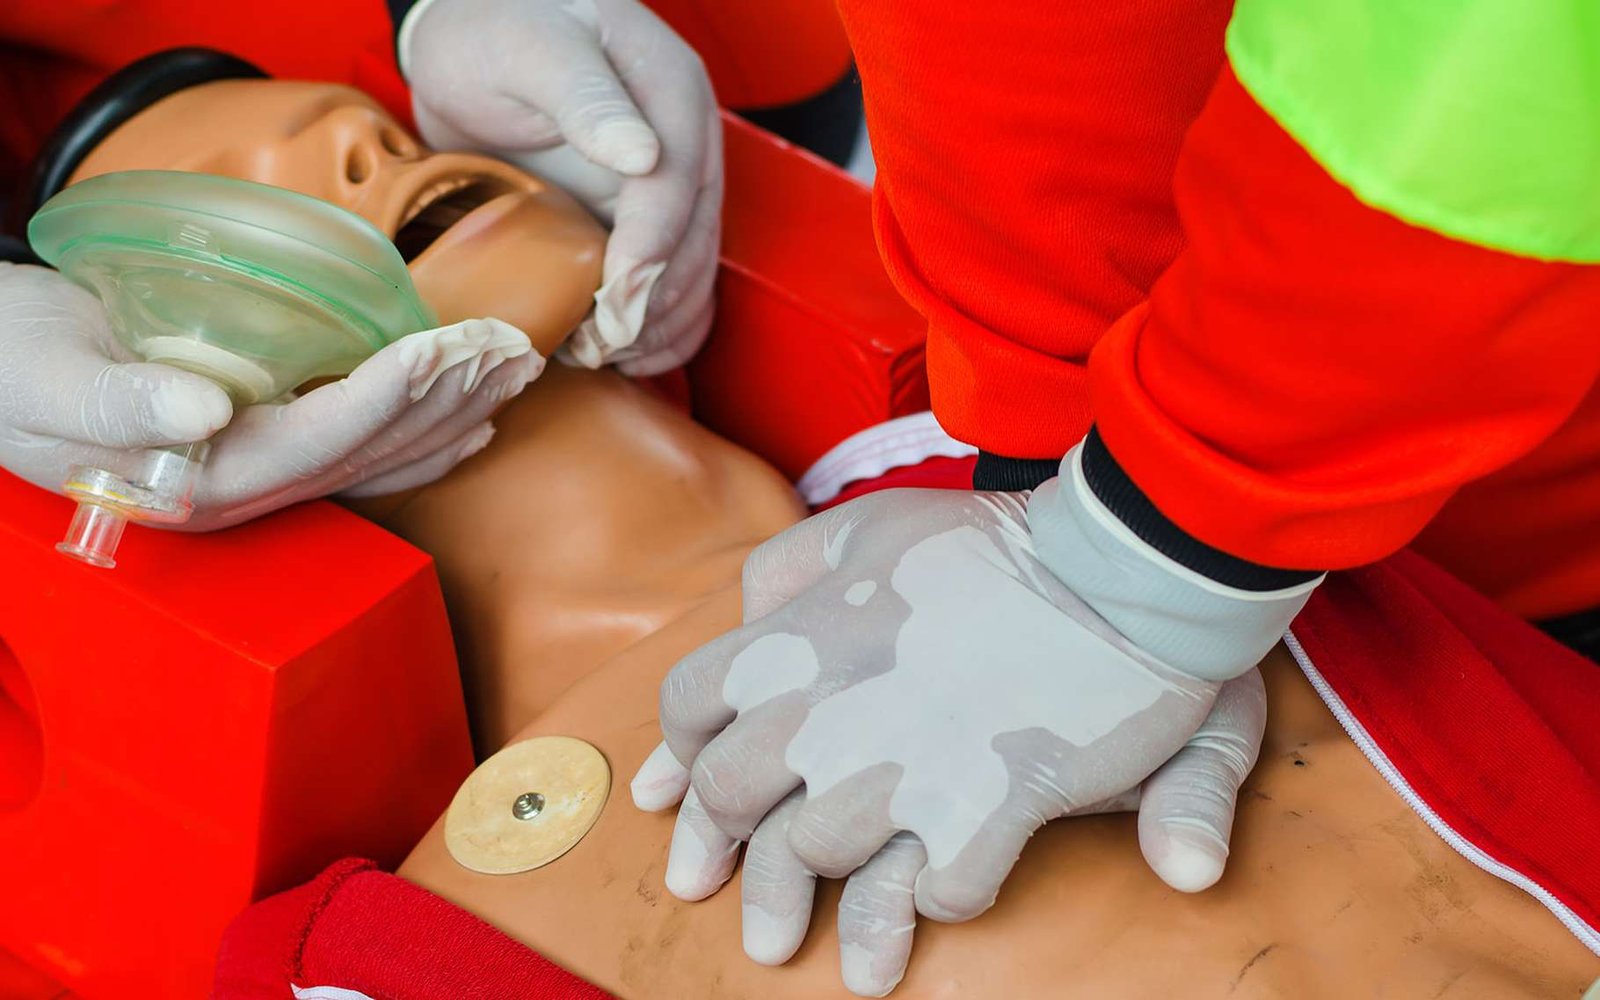 Why Should Every School Have a Remote First Aid Course?